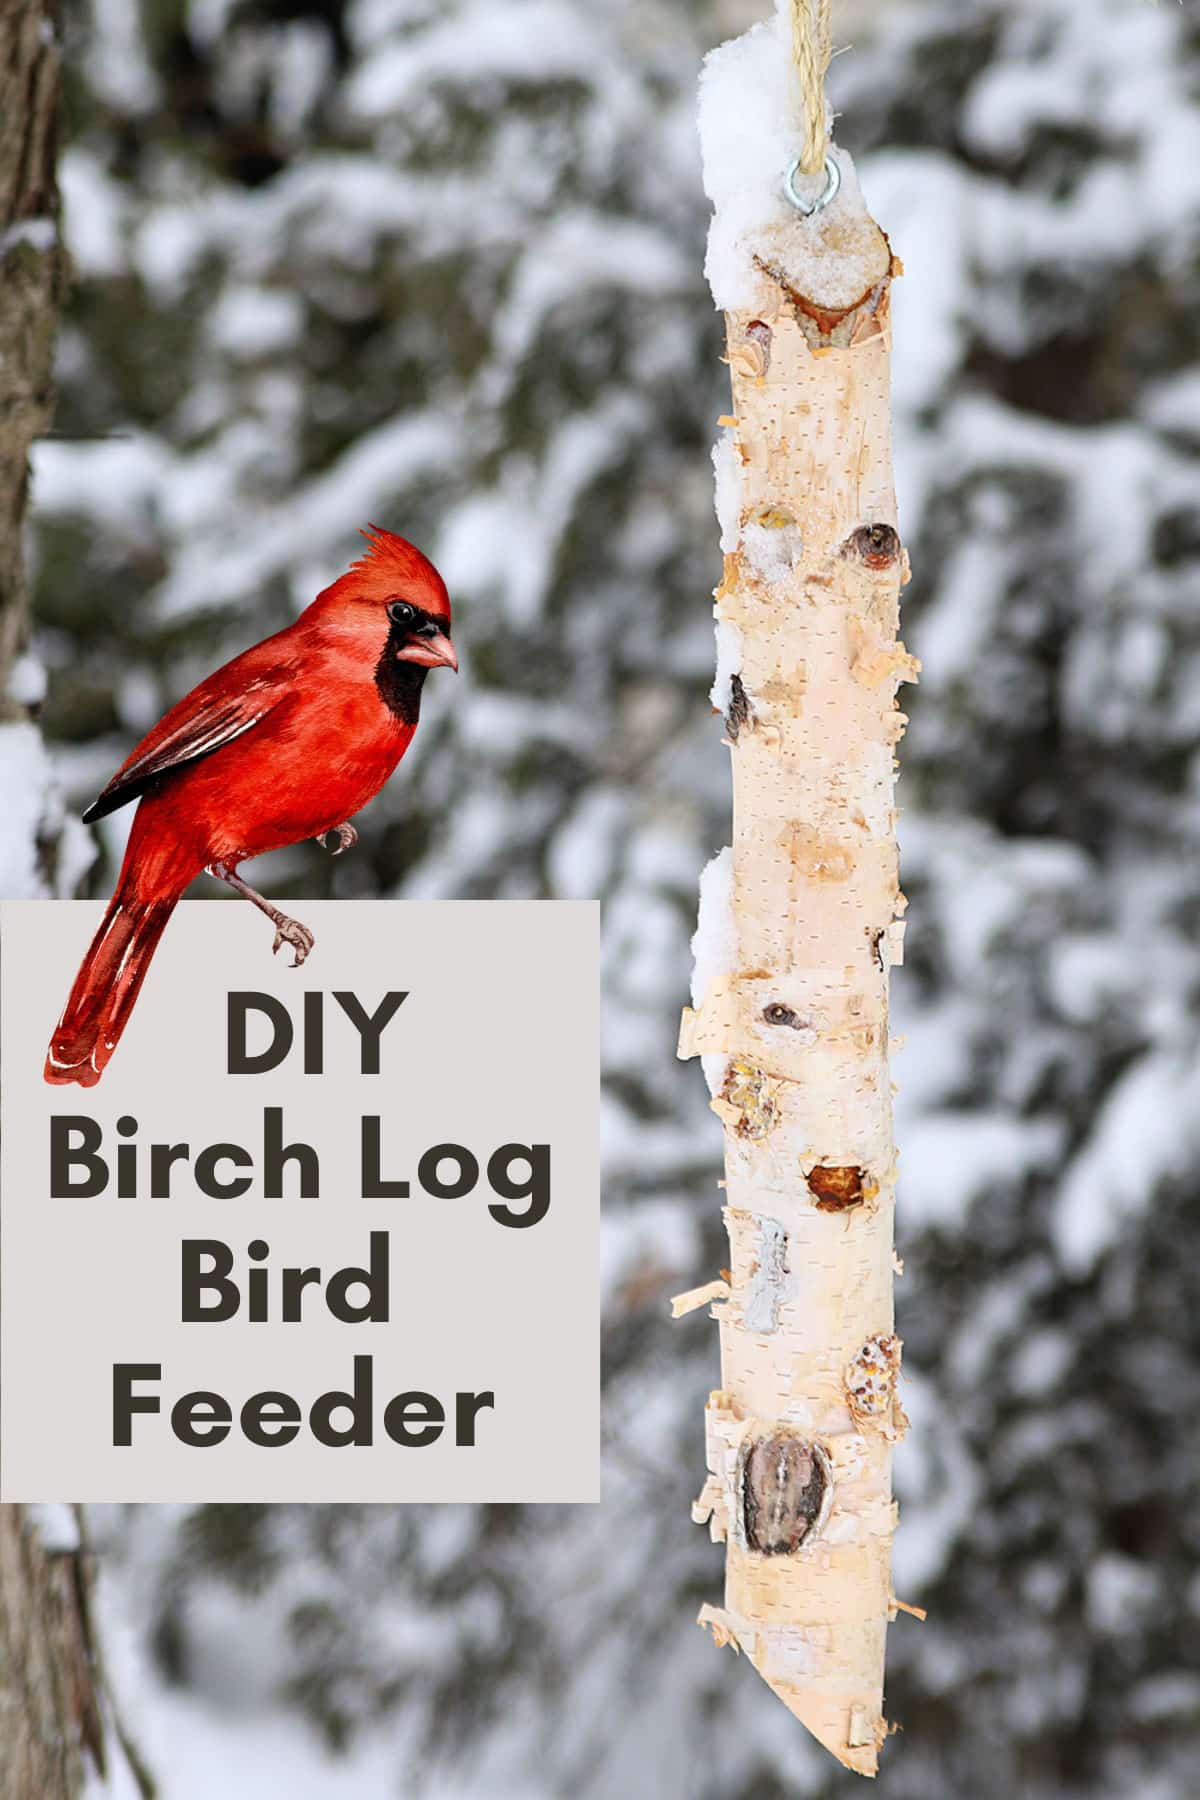 DIY bird feeder made out of a birch log. A quick and easy winter craft project.